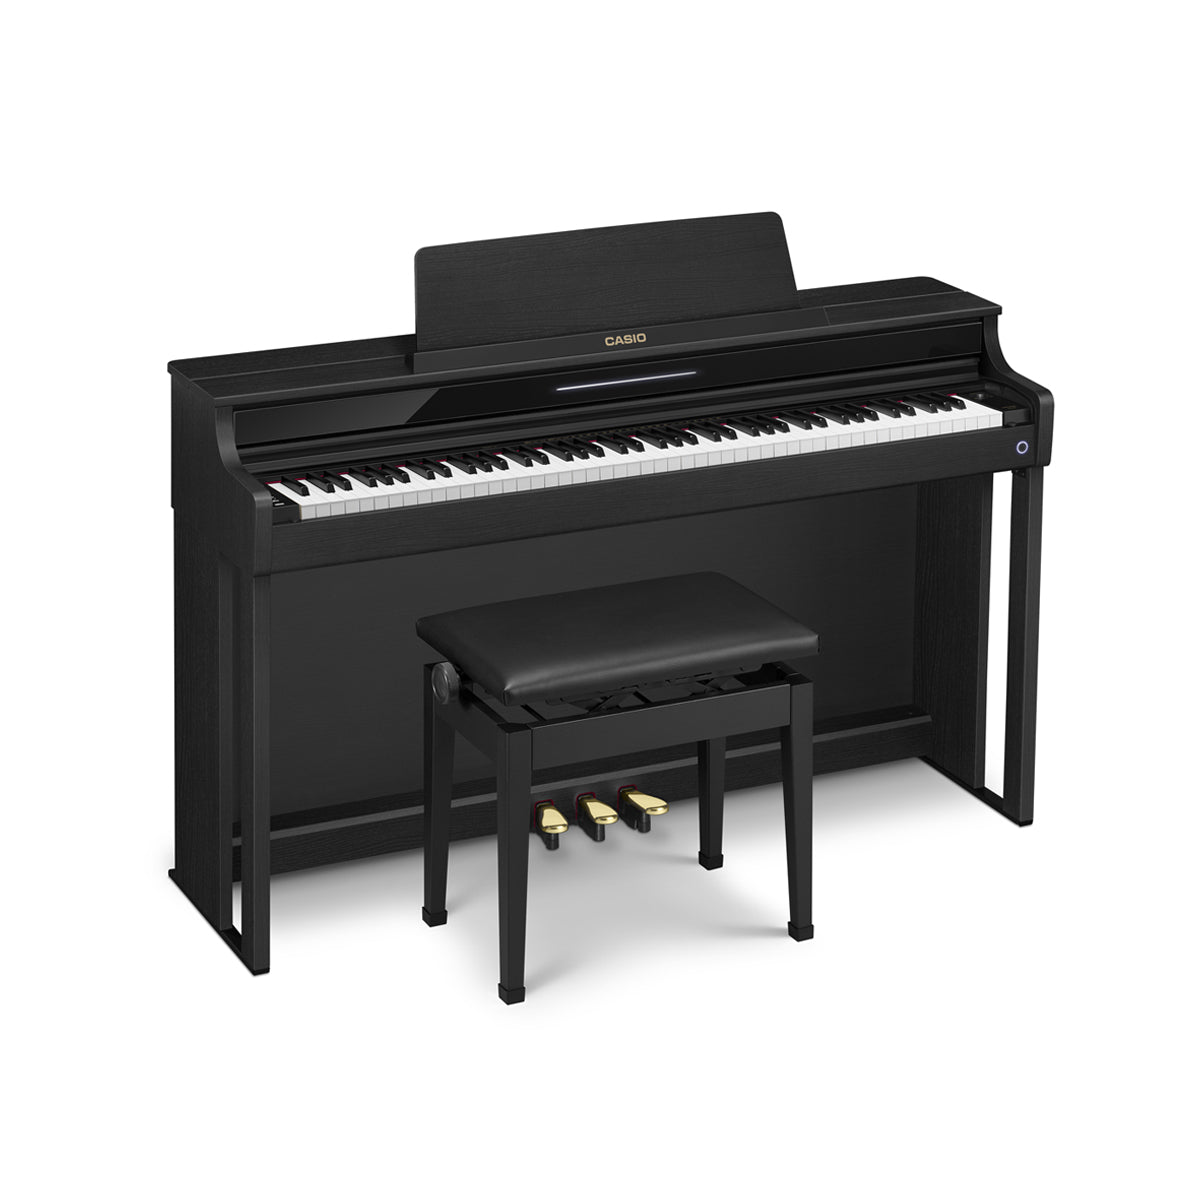 Casio AP-550BK Celviano 88 Weighted Keys Black Digital Piano includes Adapter and Piano Bench